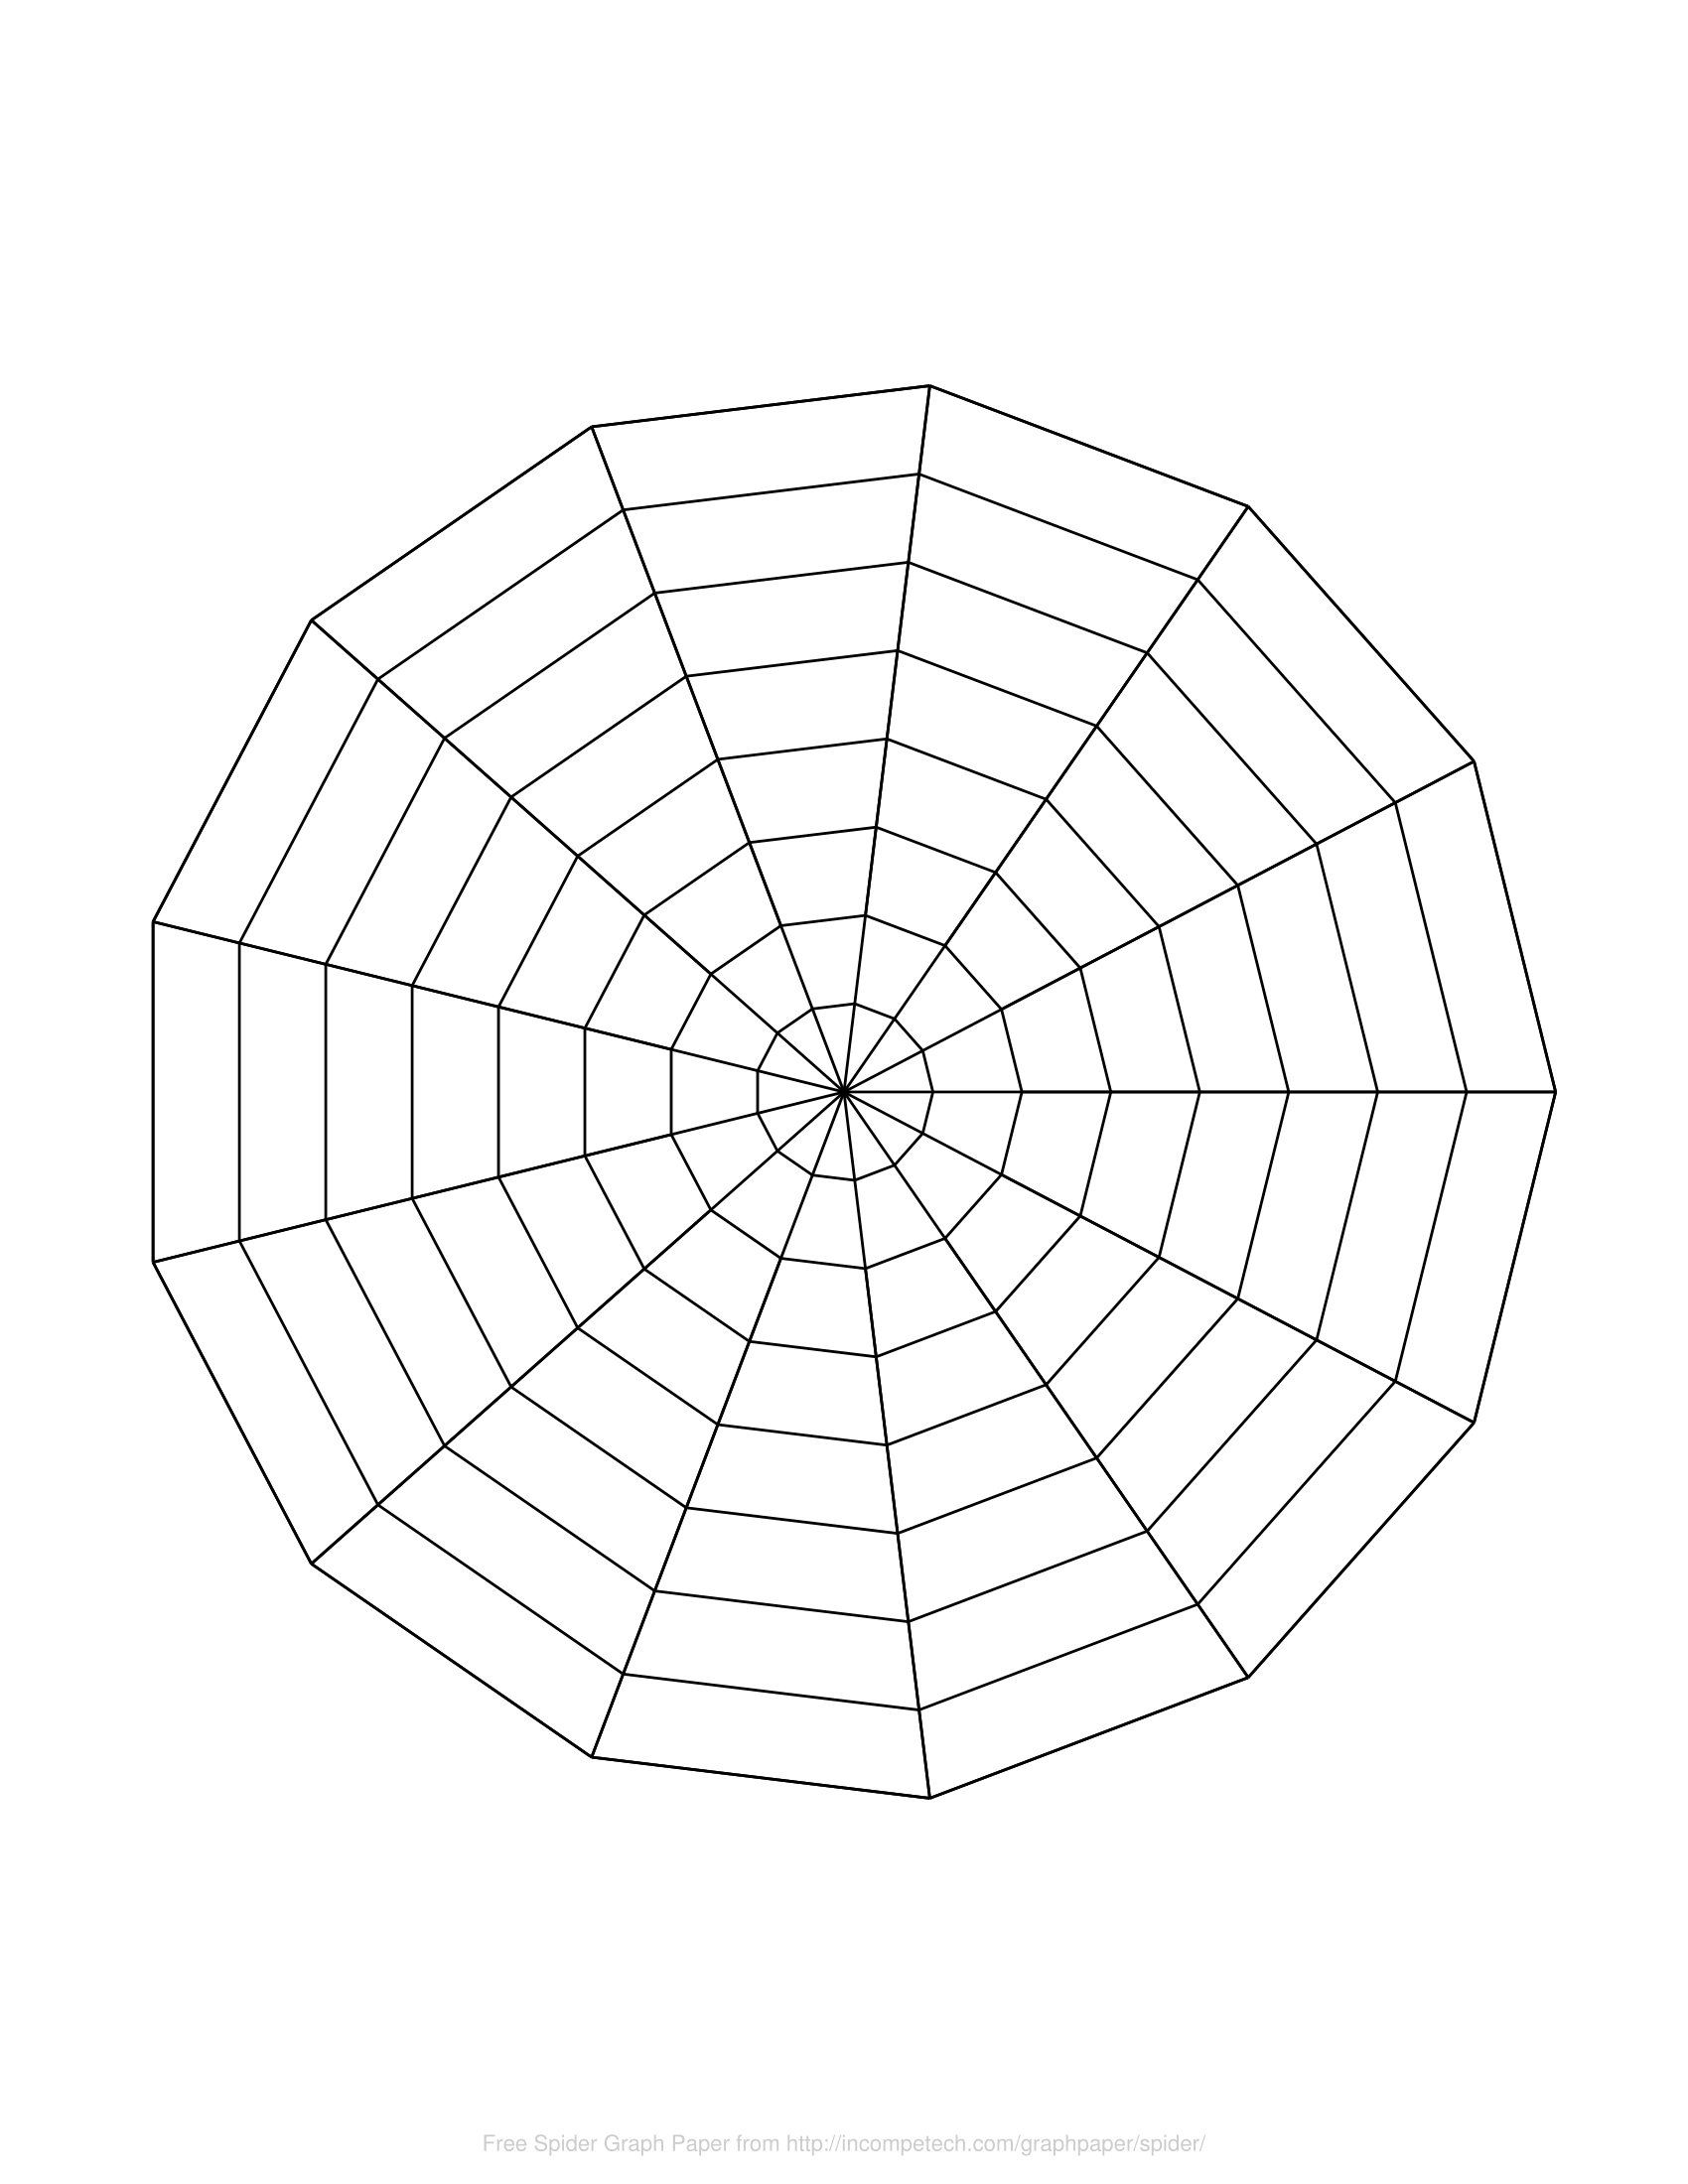 Free Online Graph Paper / Spider For Blank Radar Chart Template